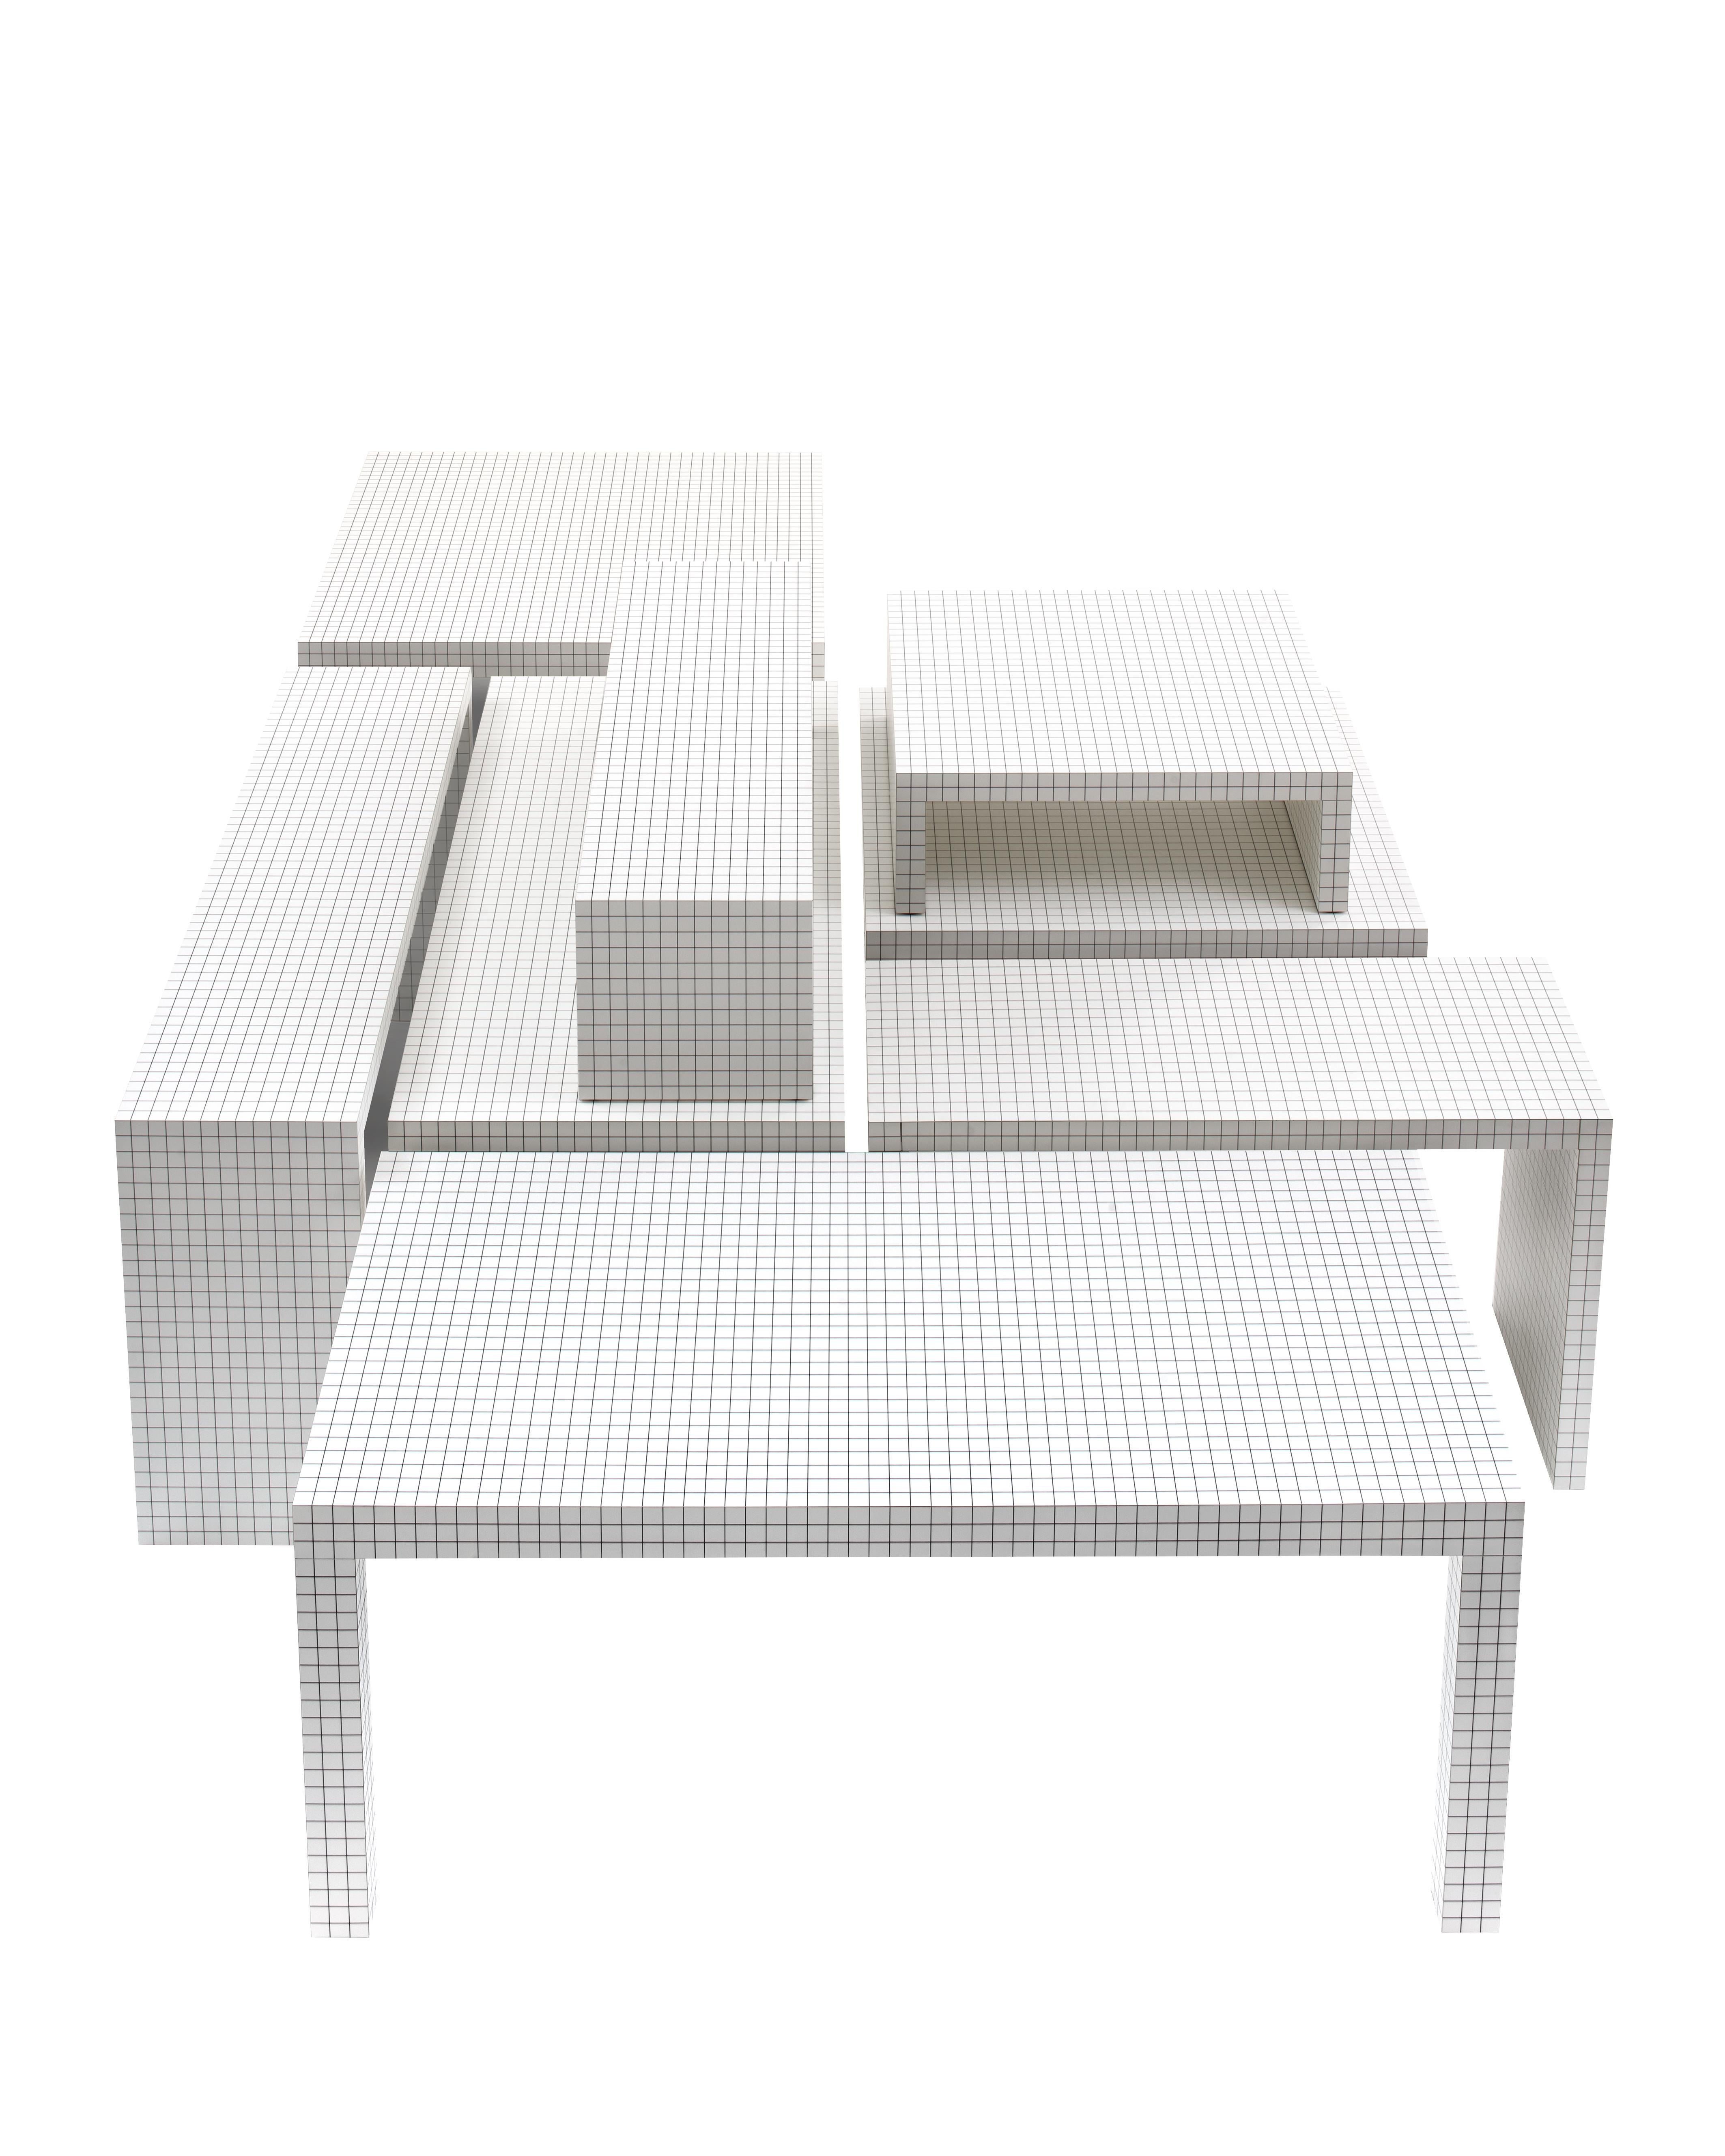 Zanotta Quaderna 710 Console Table in White Plastic Laminate by Superstudio In Excellent Condition For Sale In Brooklyn, NY